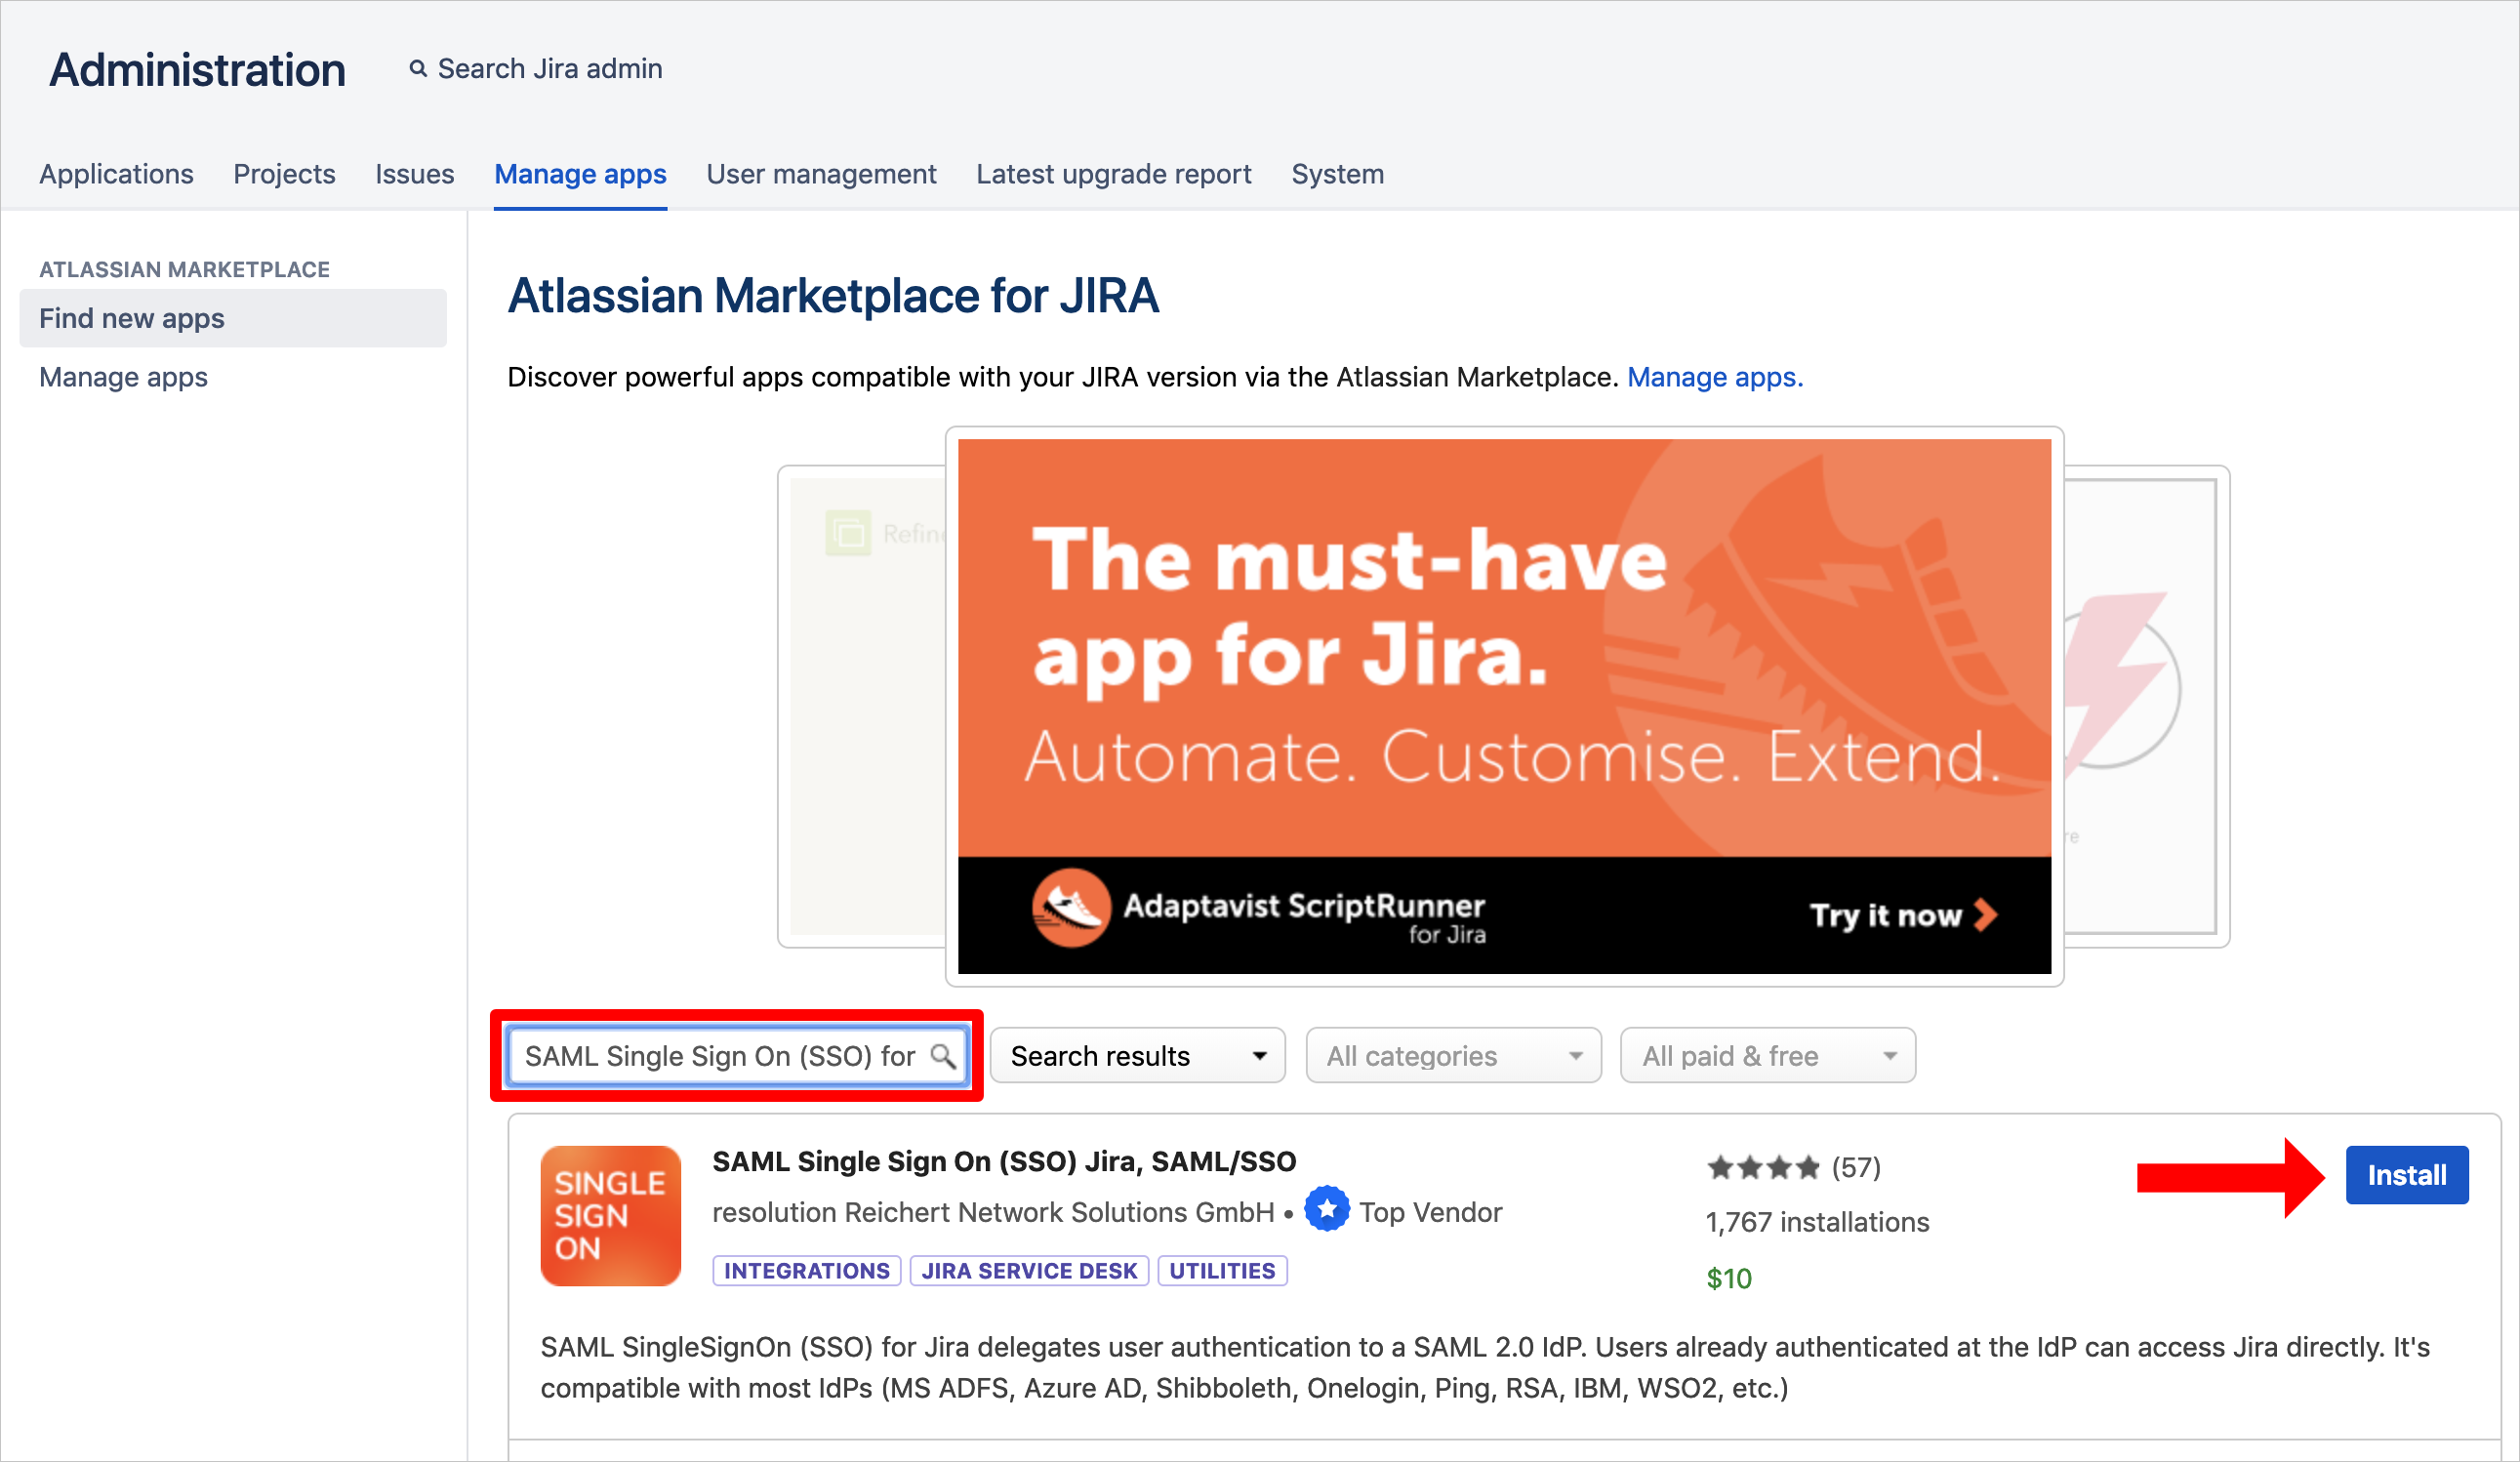 Screenshot that shows the "Atlassian Marketplace for JIRA" page with an arrow pointing at the "Install" button for the "S A M L Single Sign On (S S O) Jira, S A M L/S S O" app.